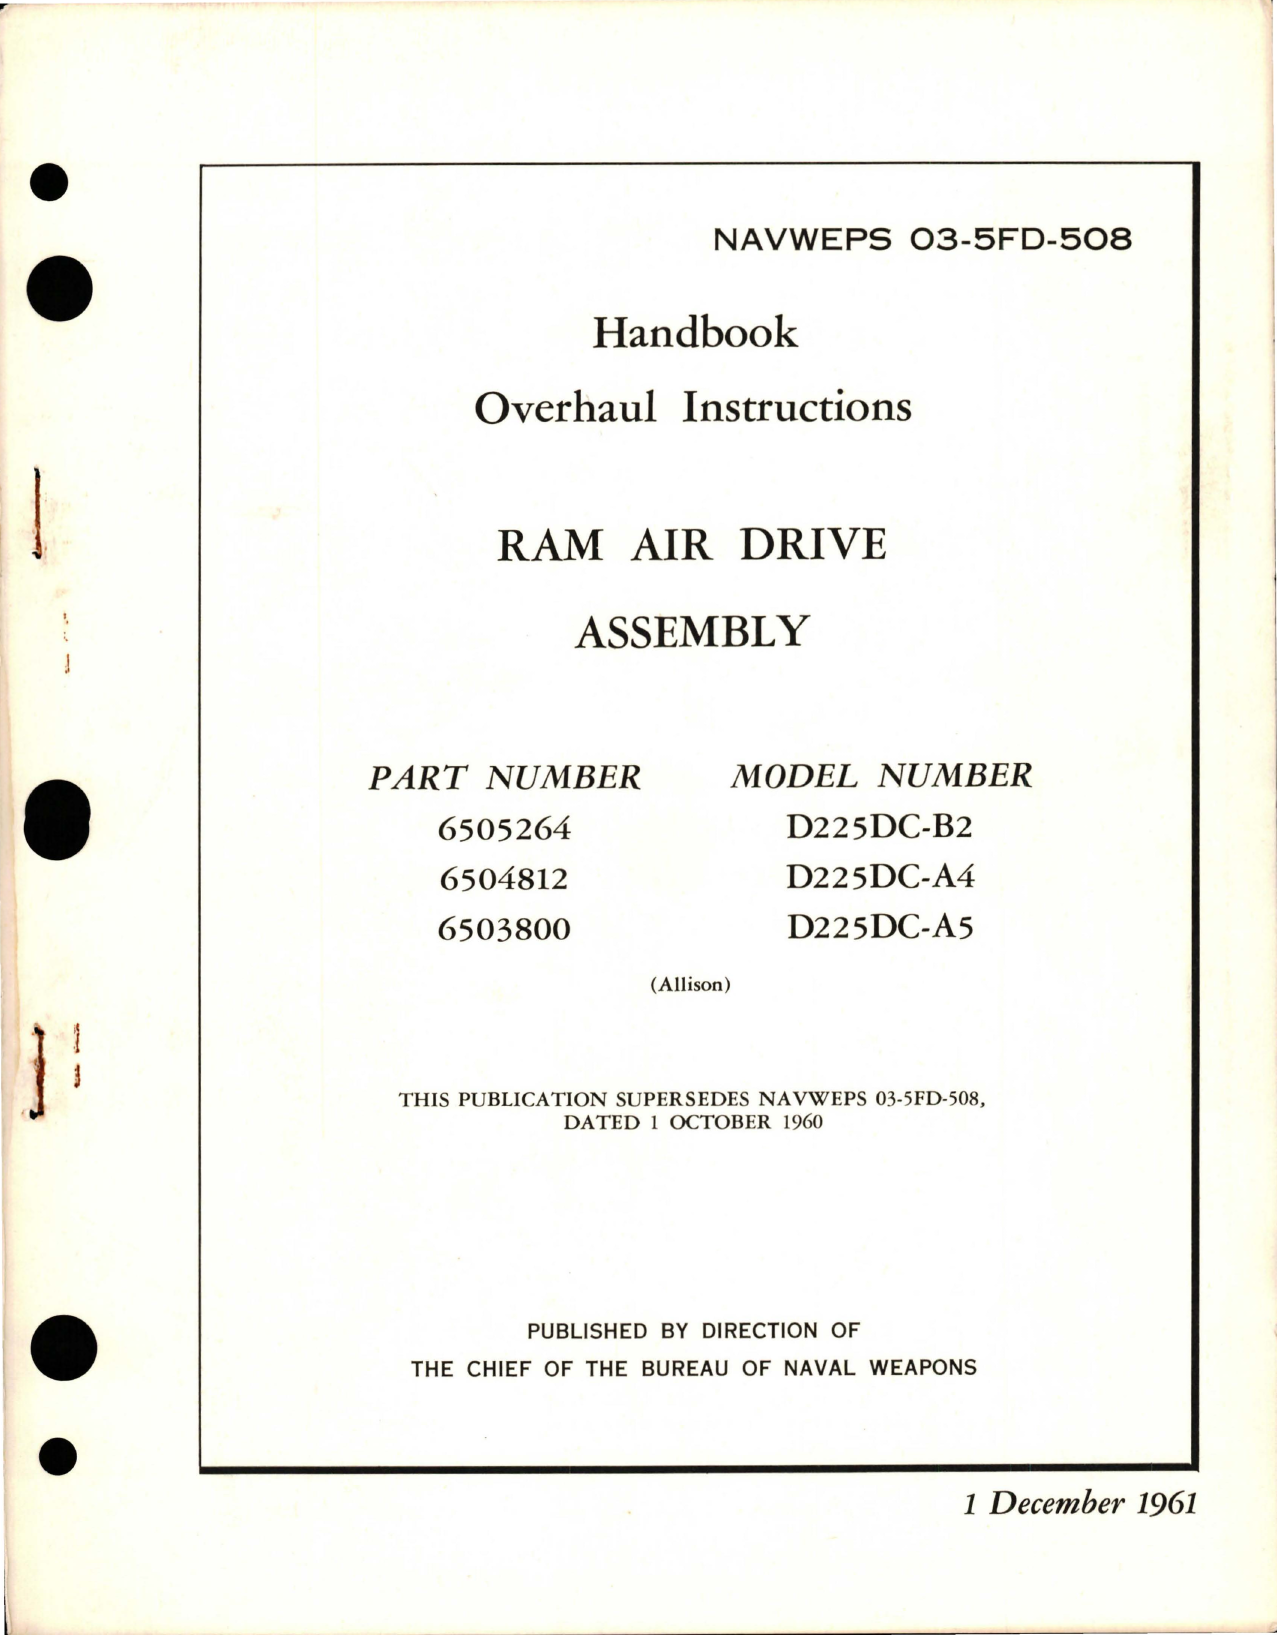 Sample page 1 from AirCorps Library document: Overhaul Instructions for Ram Air Drive Assembly - Parts 6505264, 6504812, and 6503800 